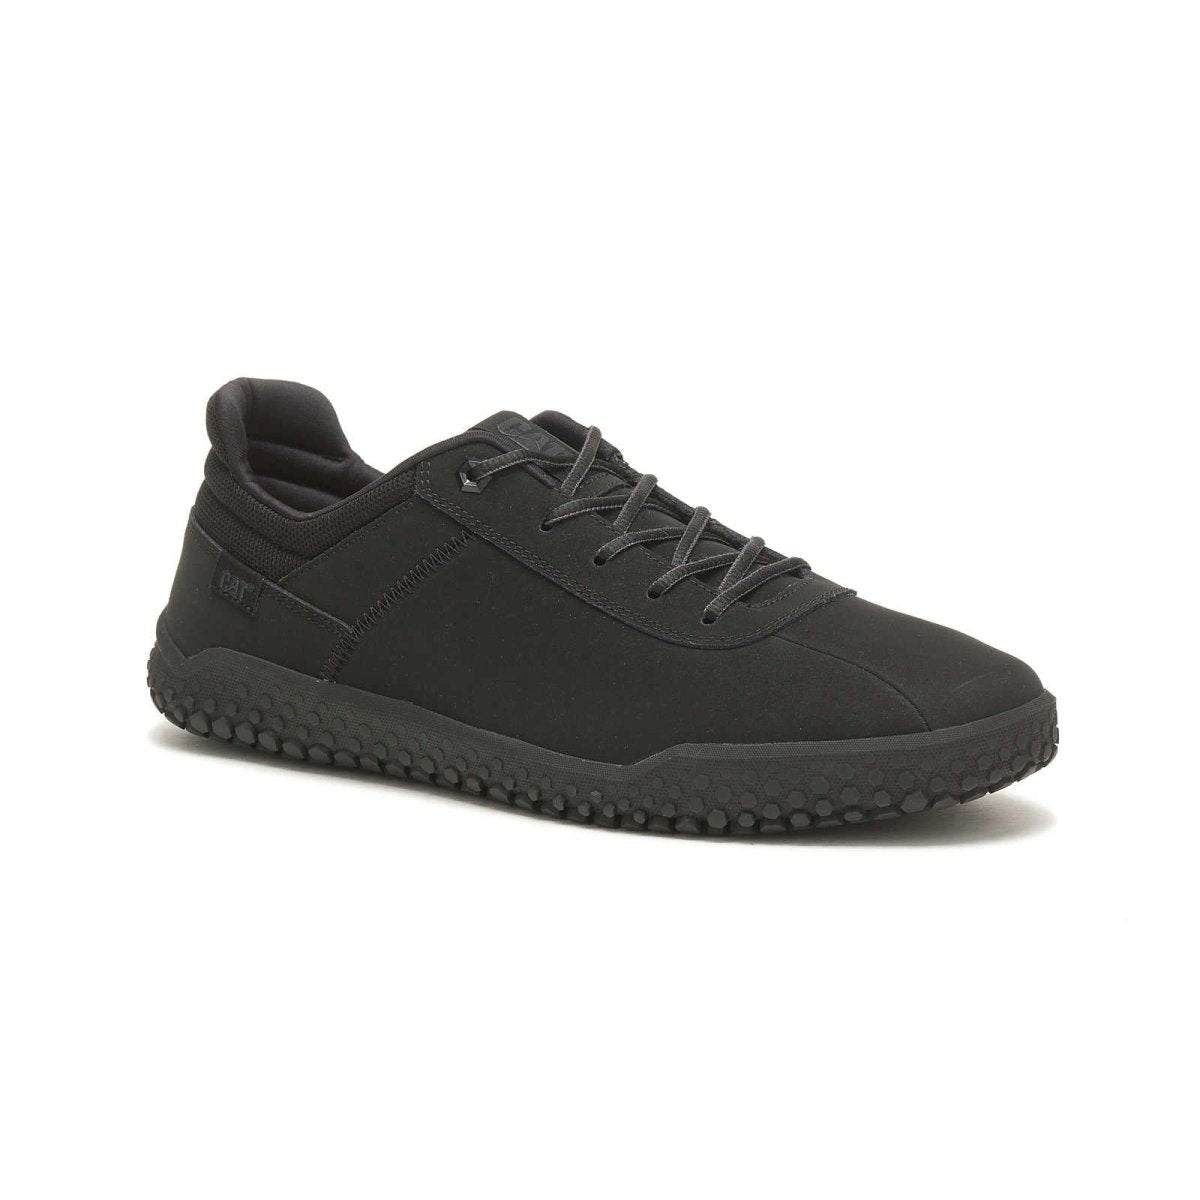 CATERPILLAR PRORUSH ALL DAY UNISEX SNEAKER (P110903) IN BLACK/BLACK - TLW Shoes